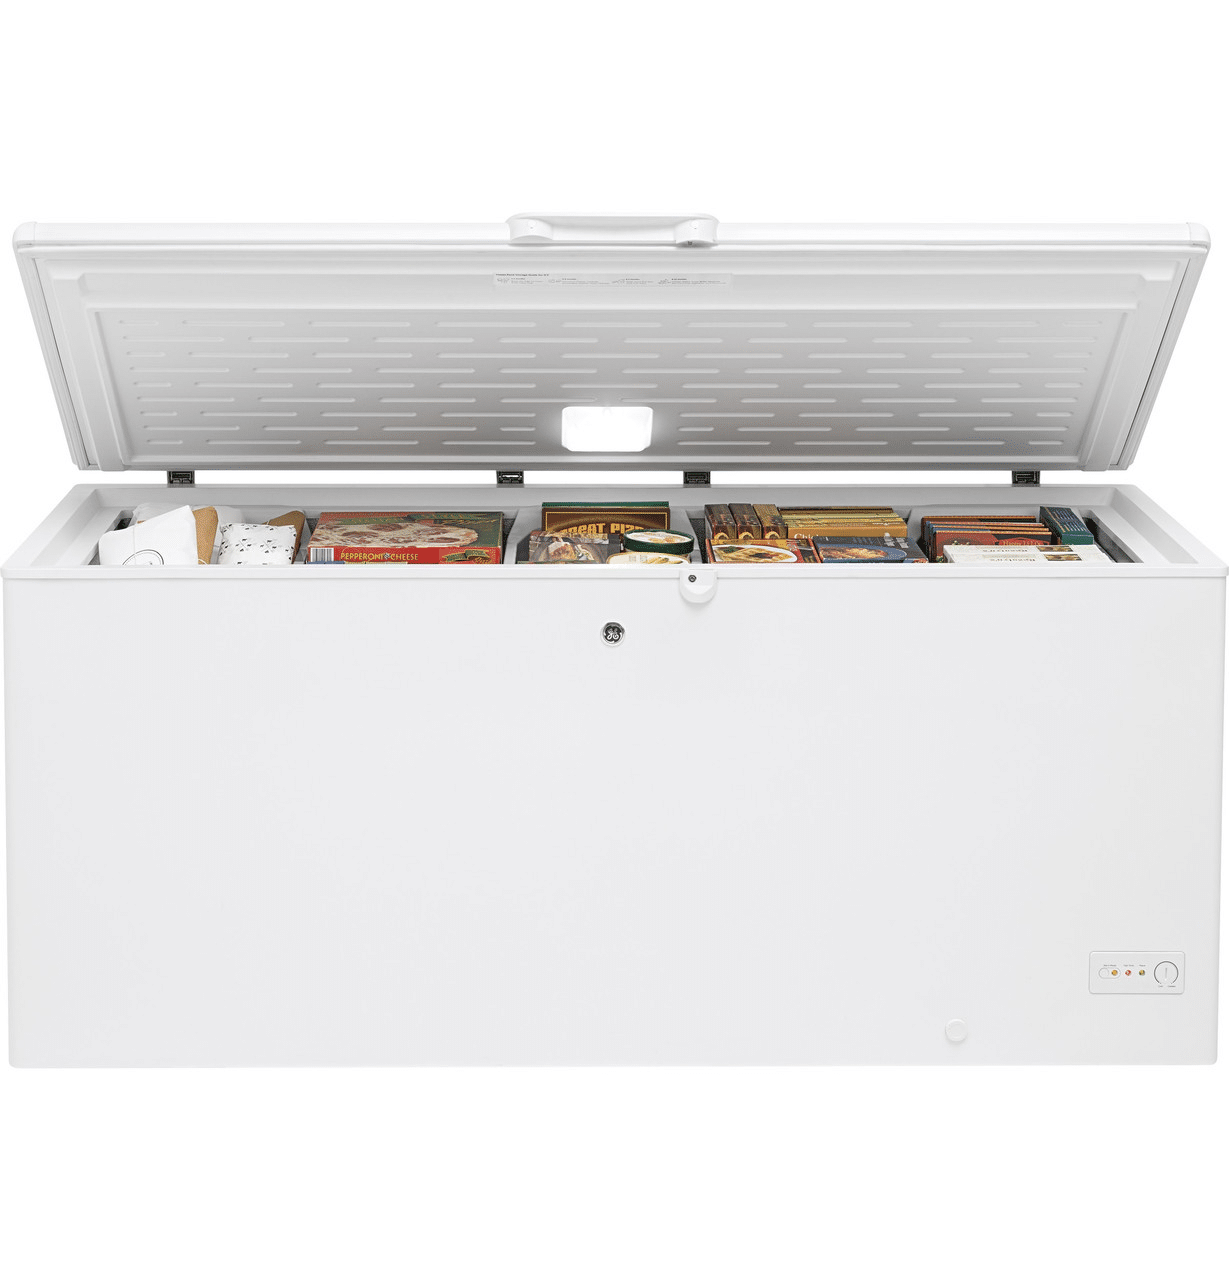 Freezer Reviews  Compare Freezers - Which?